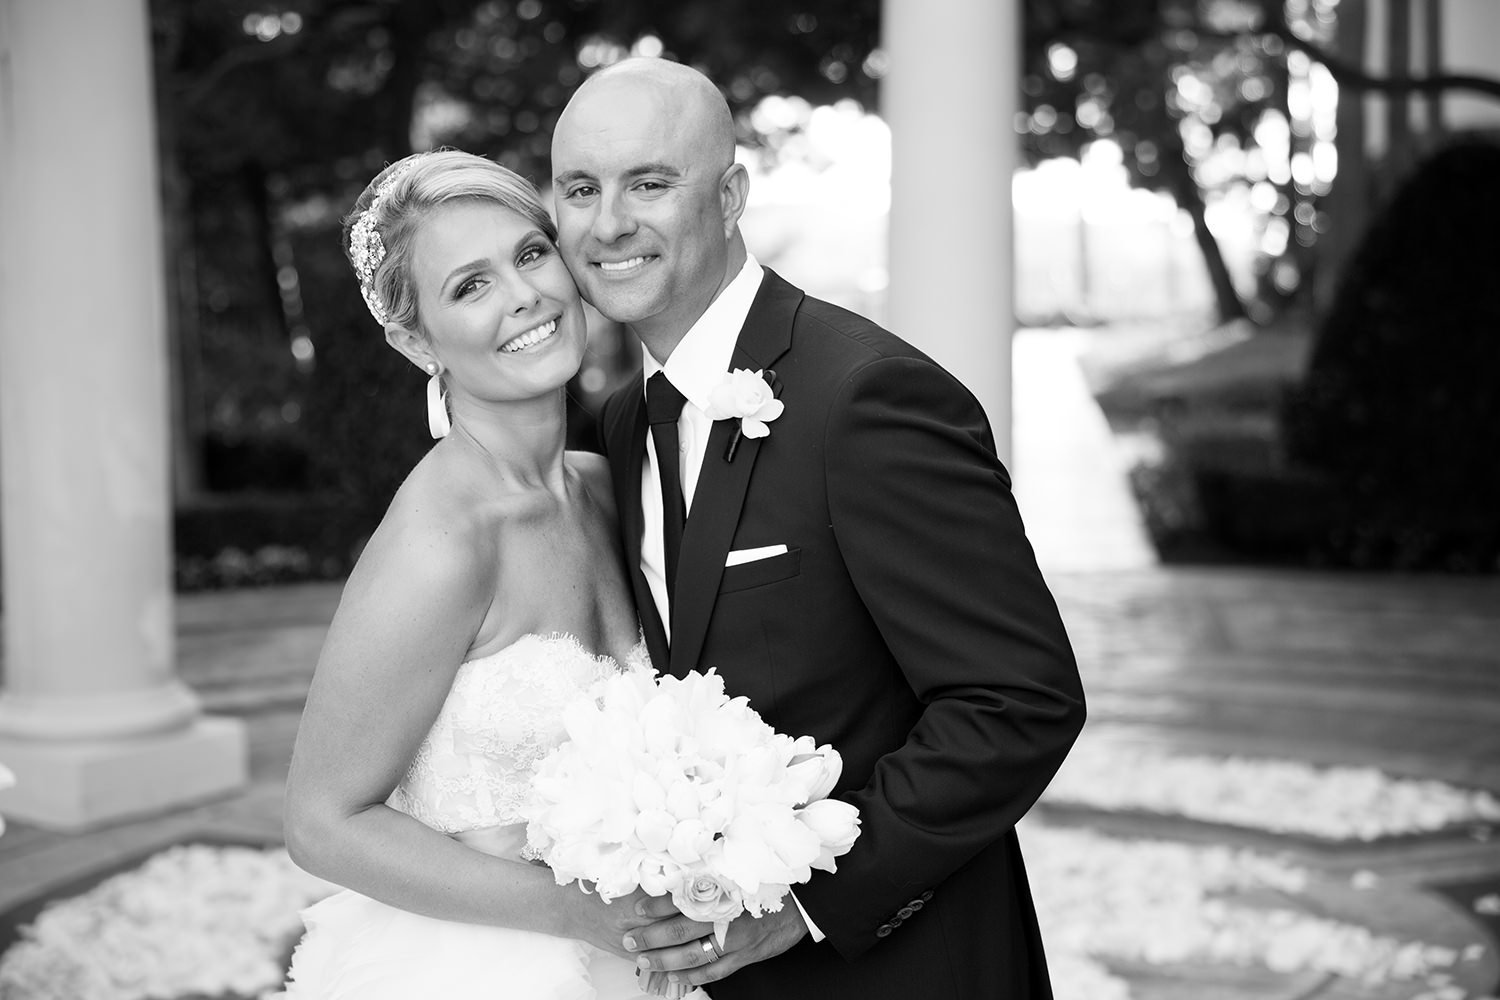 Bride and groom in a classic black and white